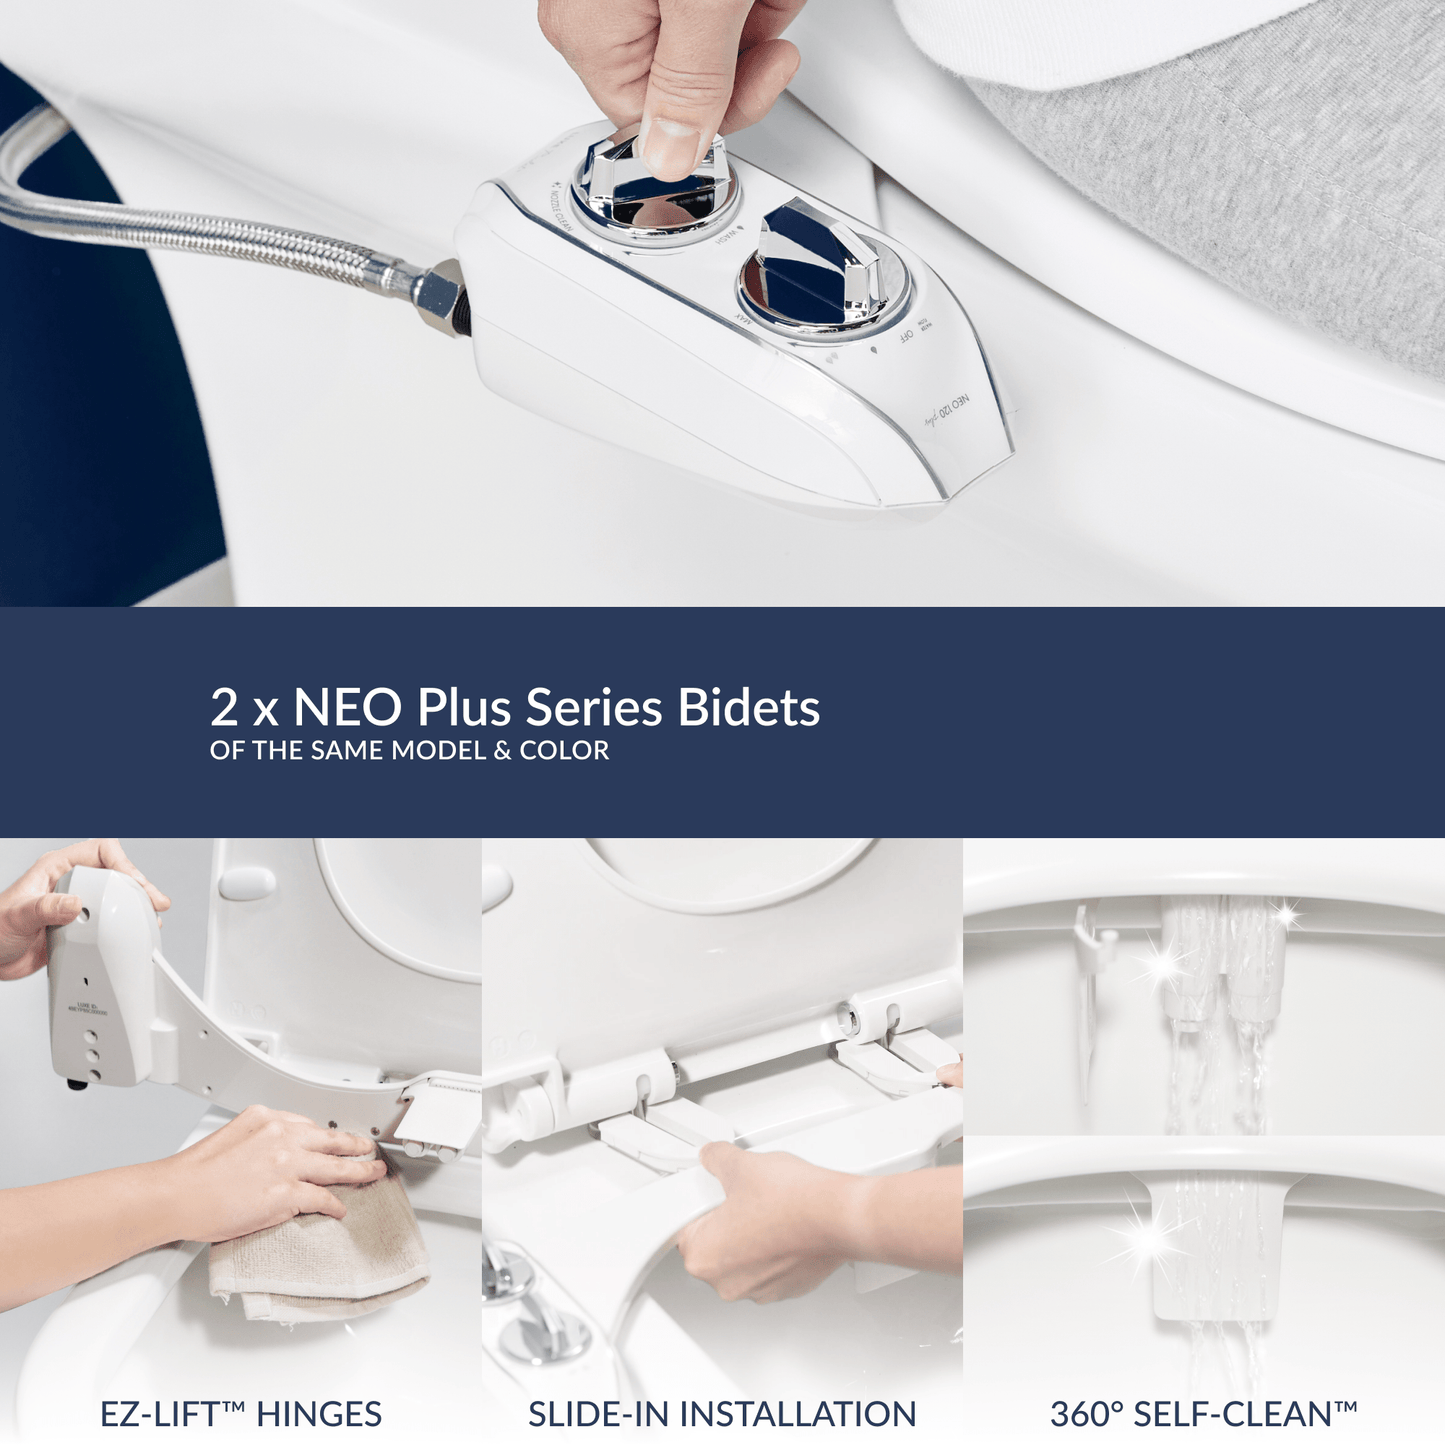 2 NEO 120 Plus Bidets - showing exclusive NEO Plus features: EZ Lift Hinges, Slide-In Installation, 360° Self-Clean